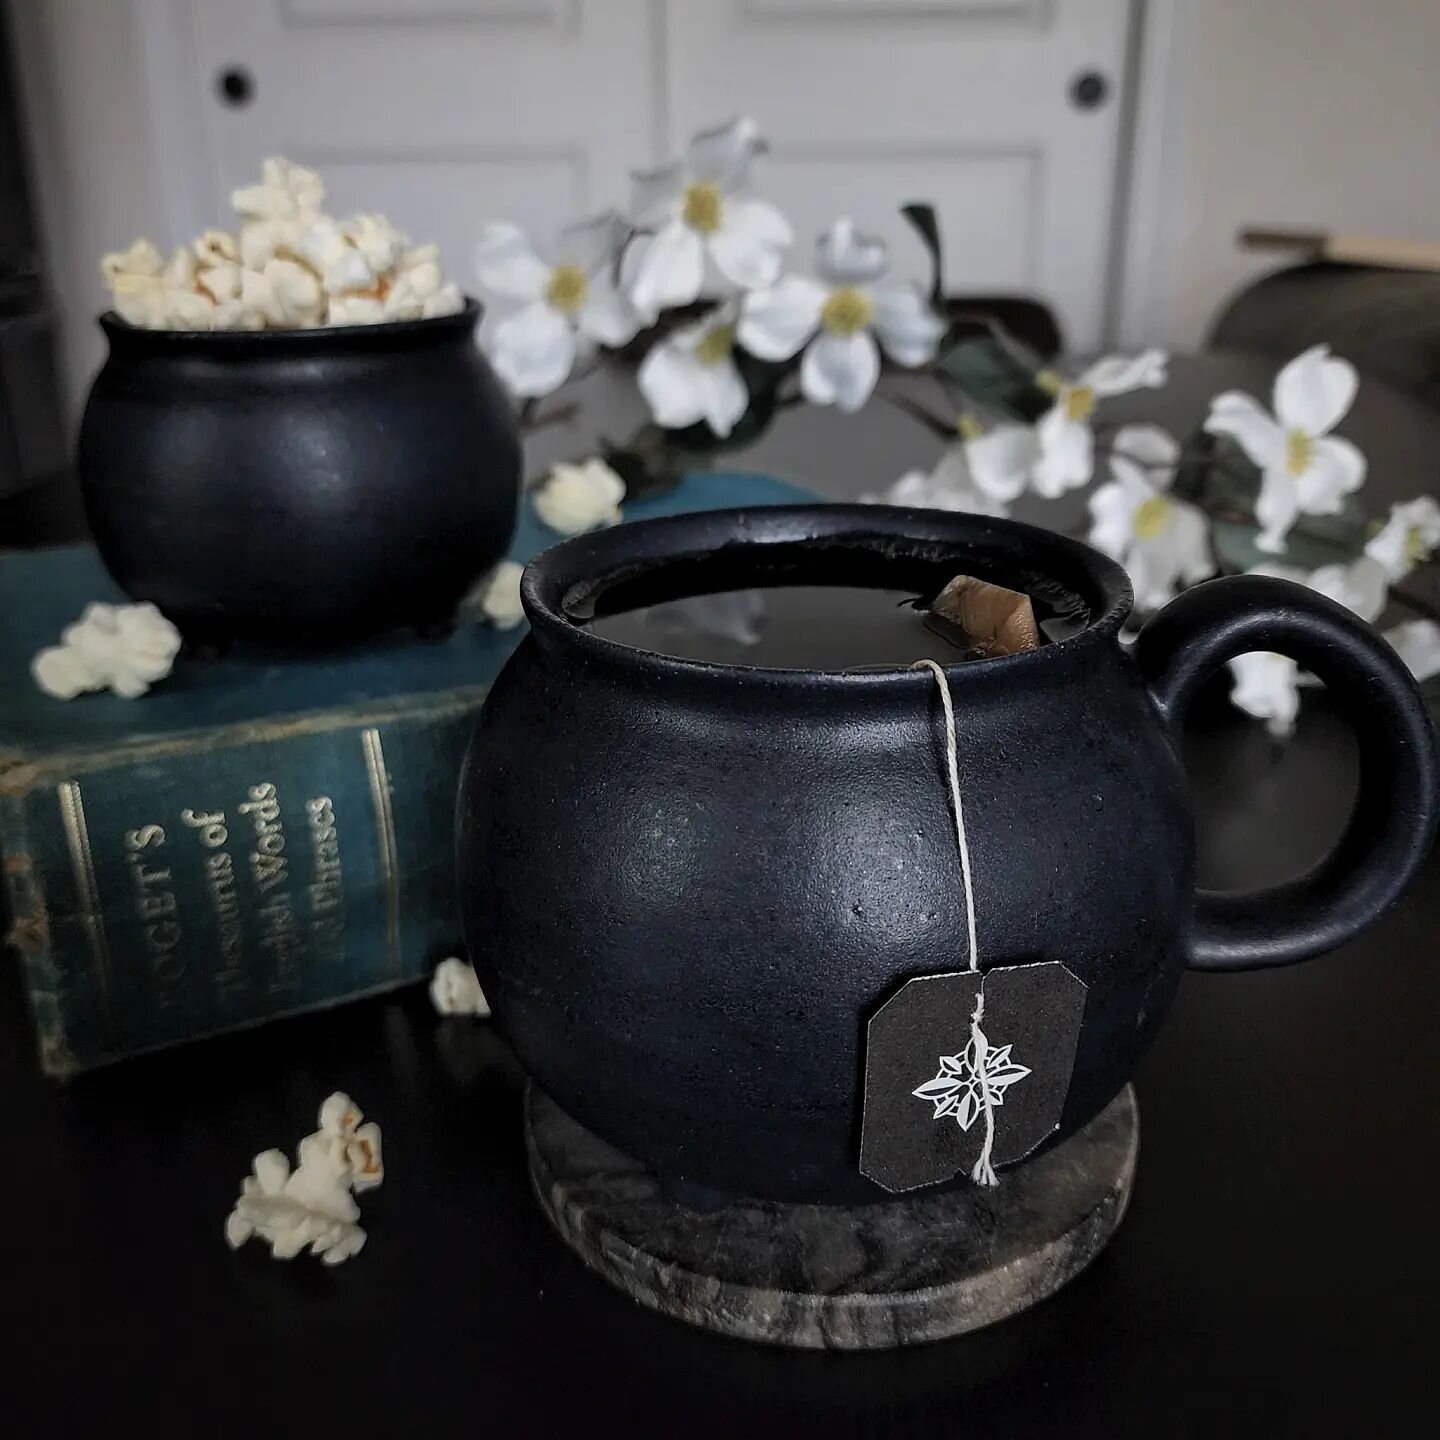 8oz Cauldron Tumblers are great for all sorts of functions.